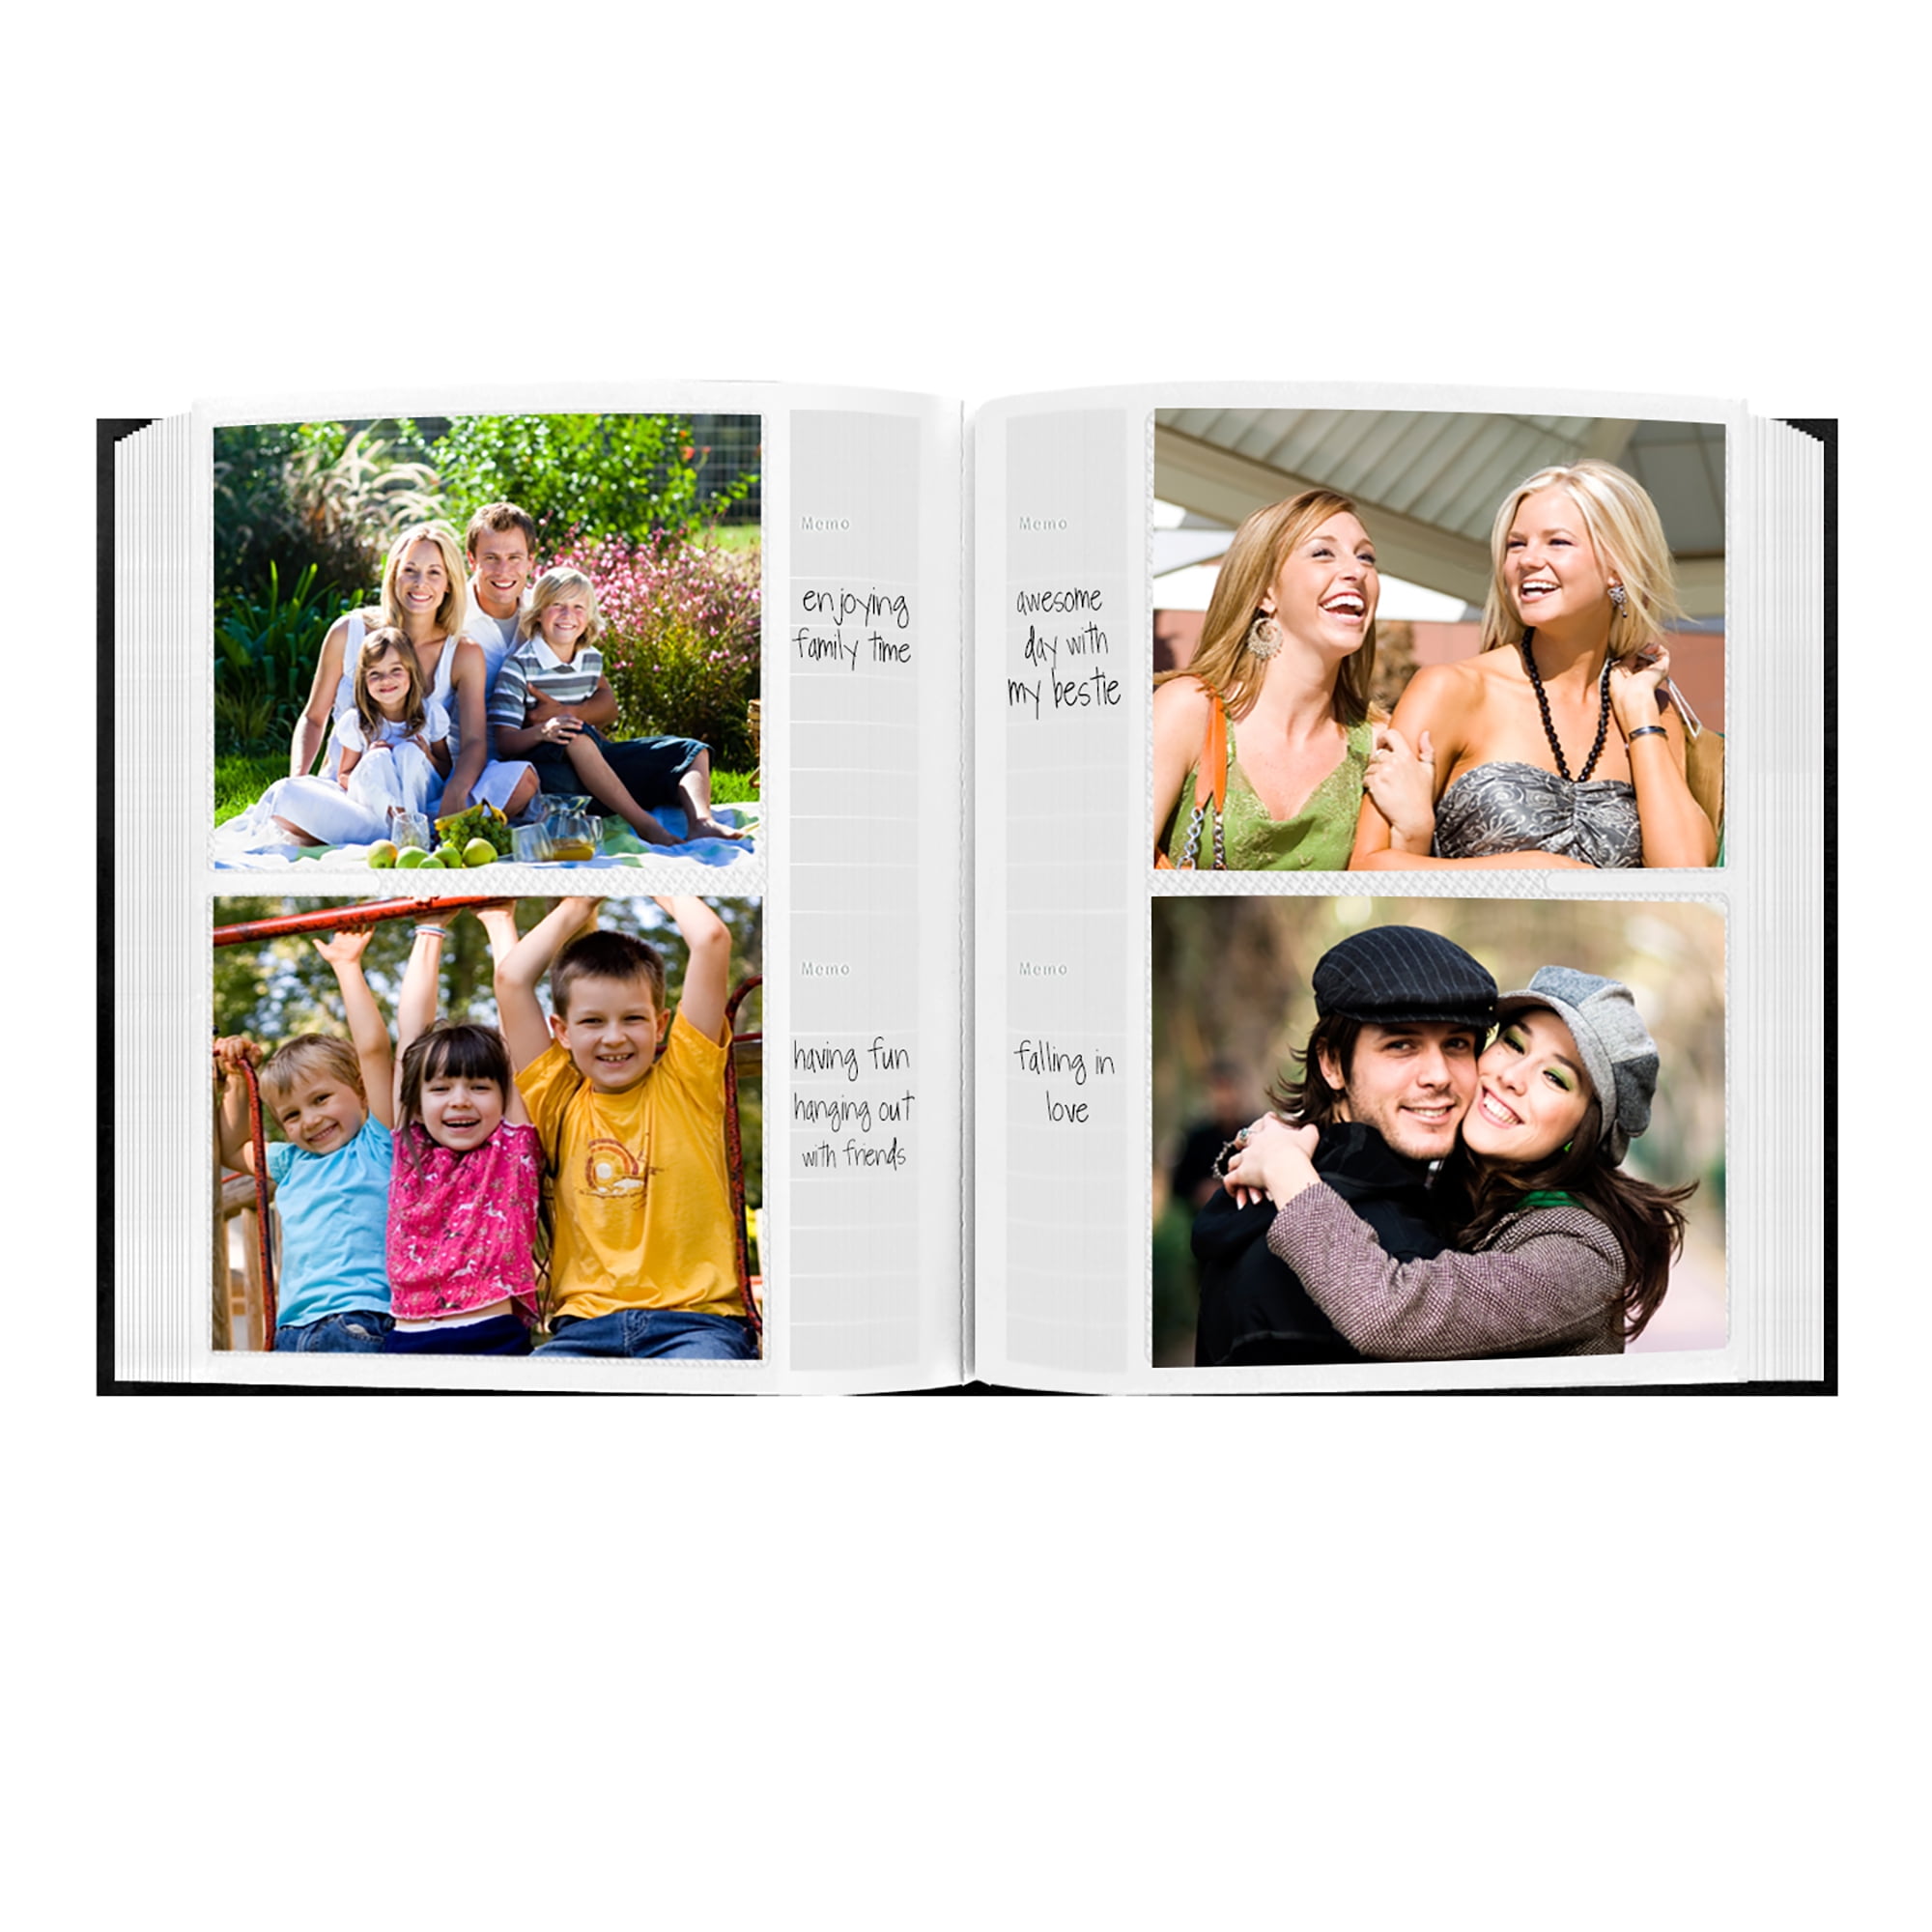 272 Pockets Photo Album 5x7 Holds 272 Photos, 5x7 Photo Album Extra Large  Capacity Leather Cover Photo Albums for Family Wedding Baby Pictures, 5 x 7